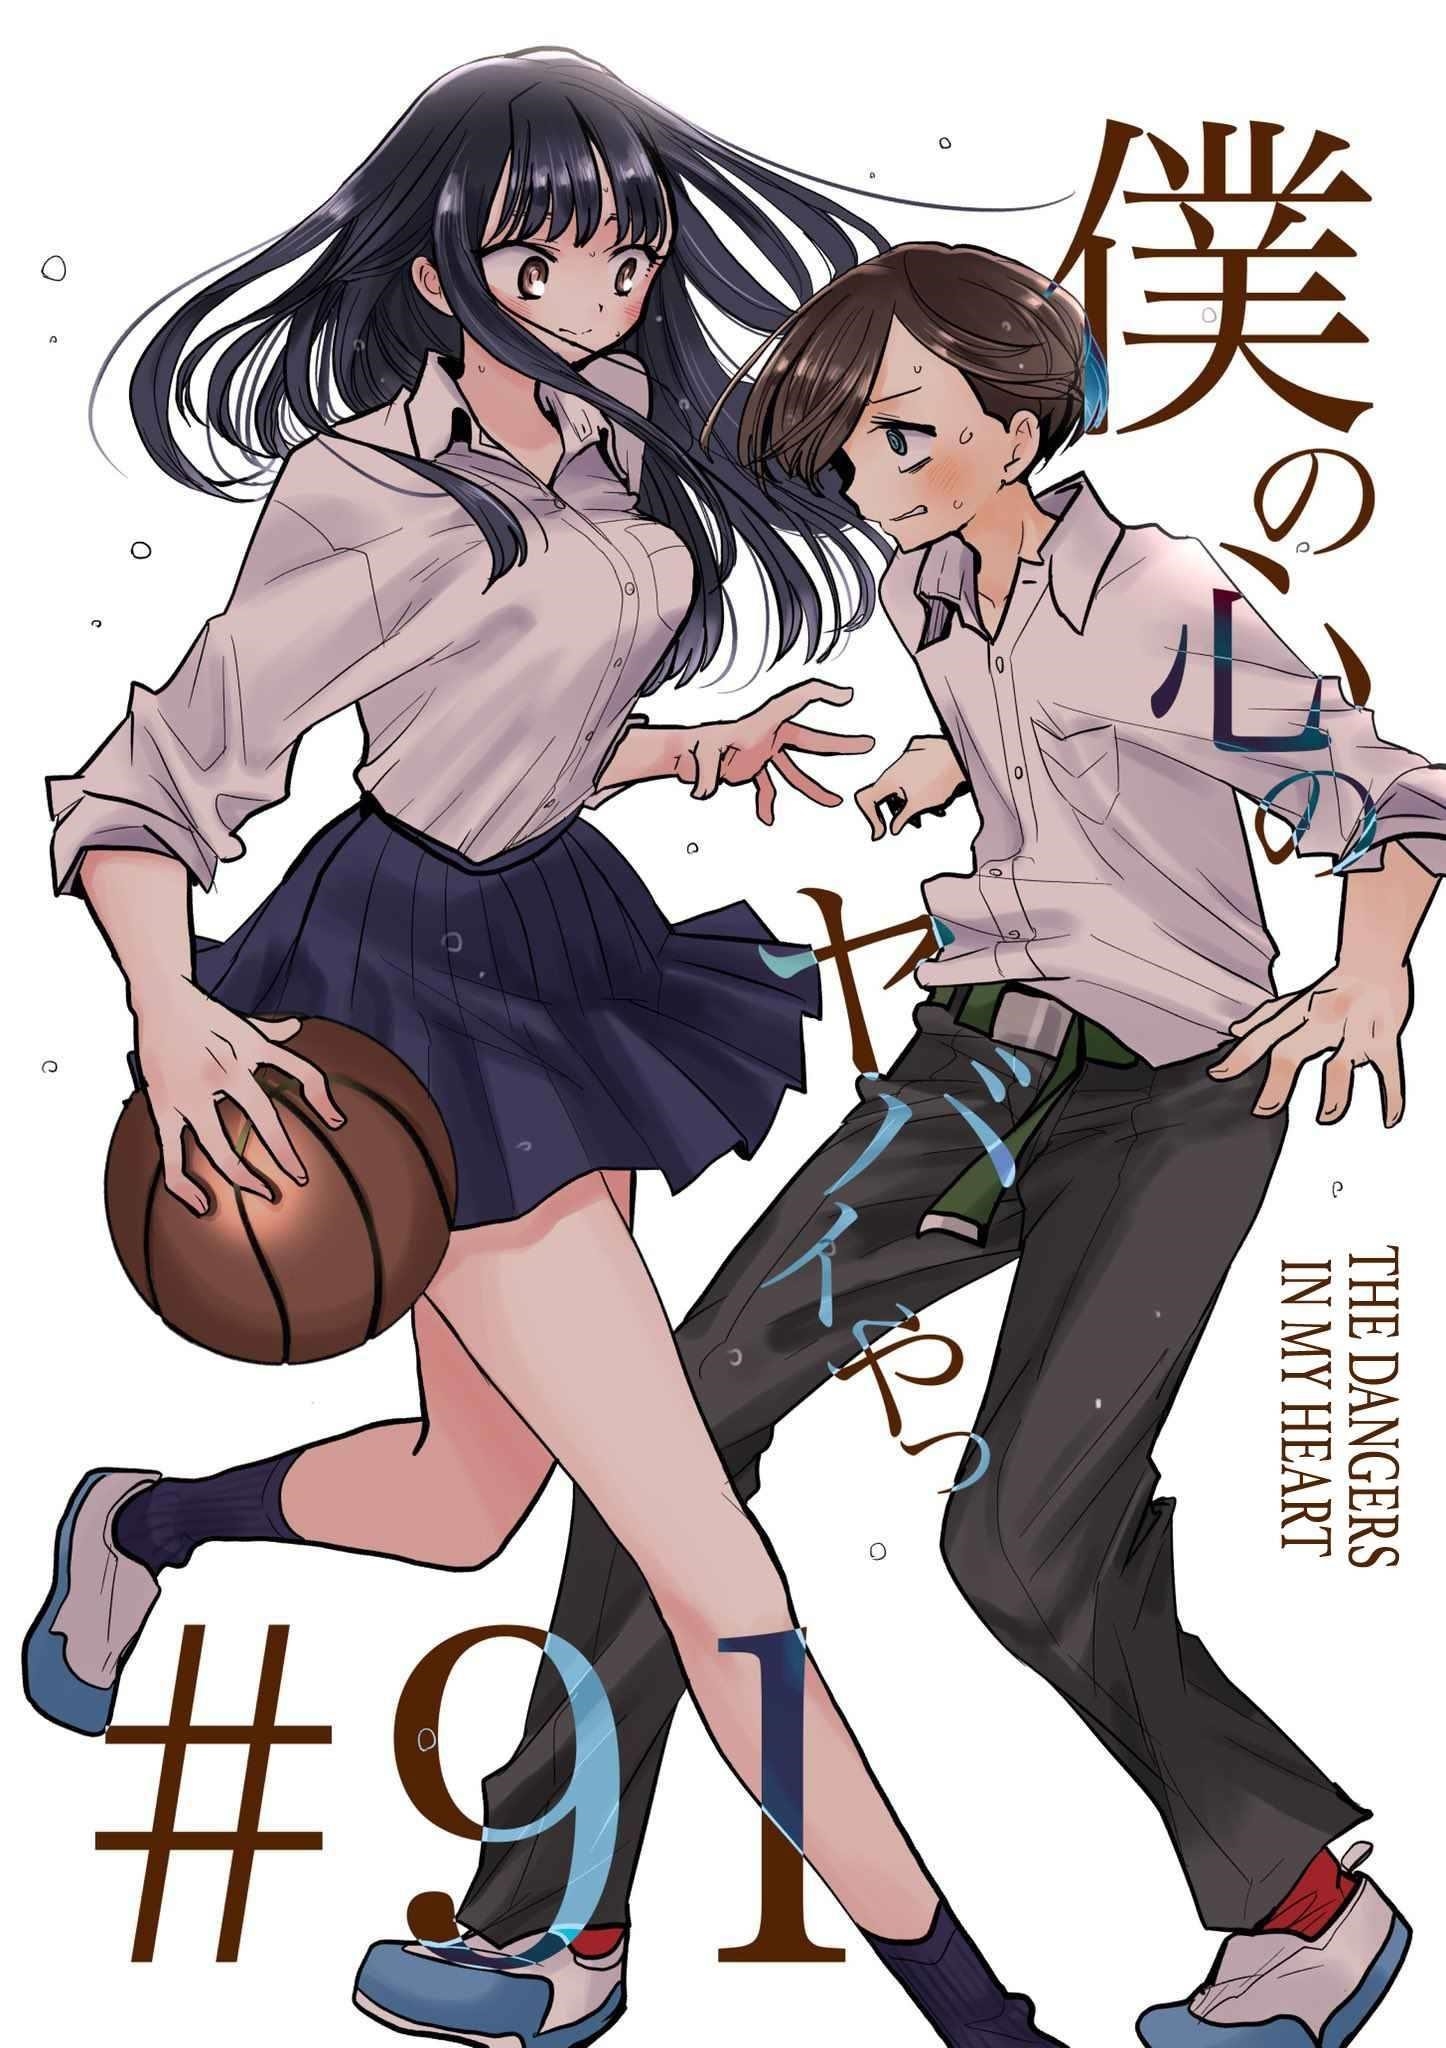 The Dangers in My Heart, Chapter 114 - The Dangers in My Heart Manga Online